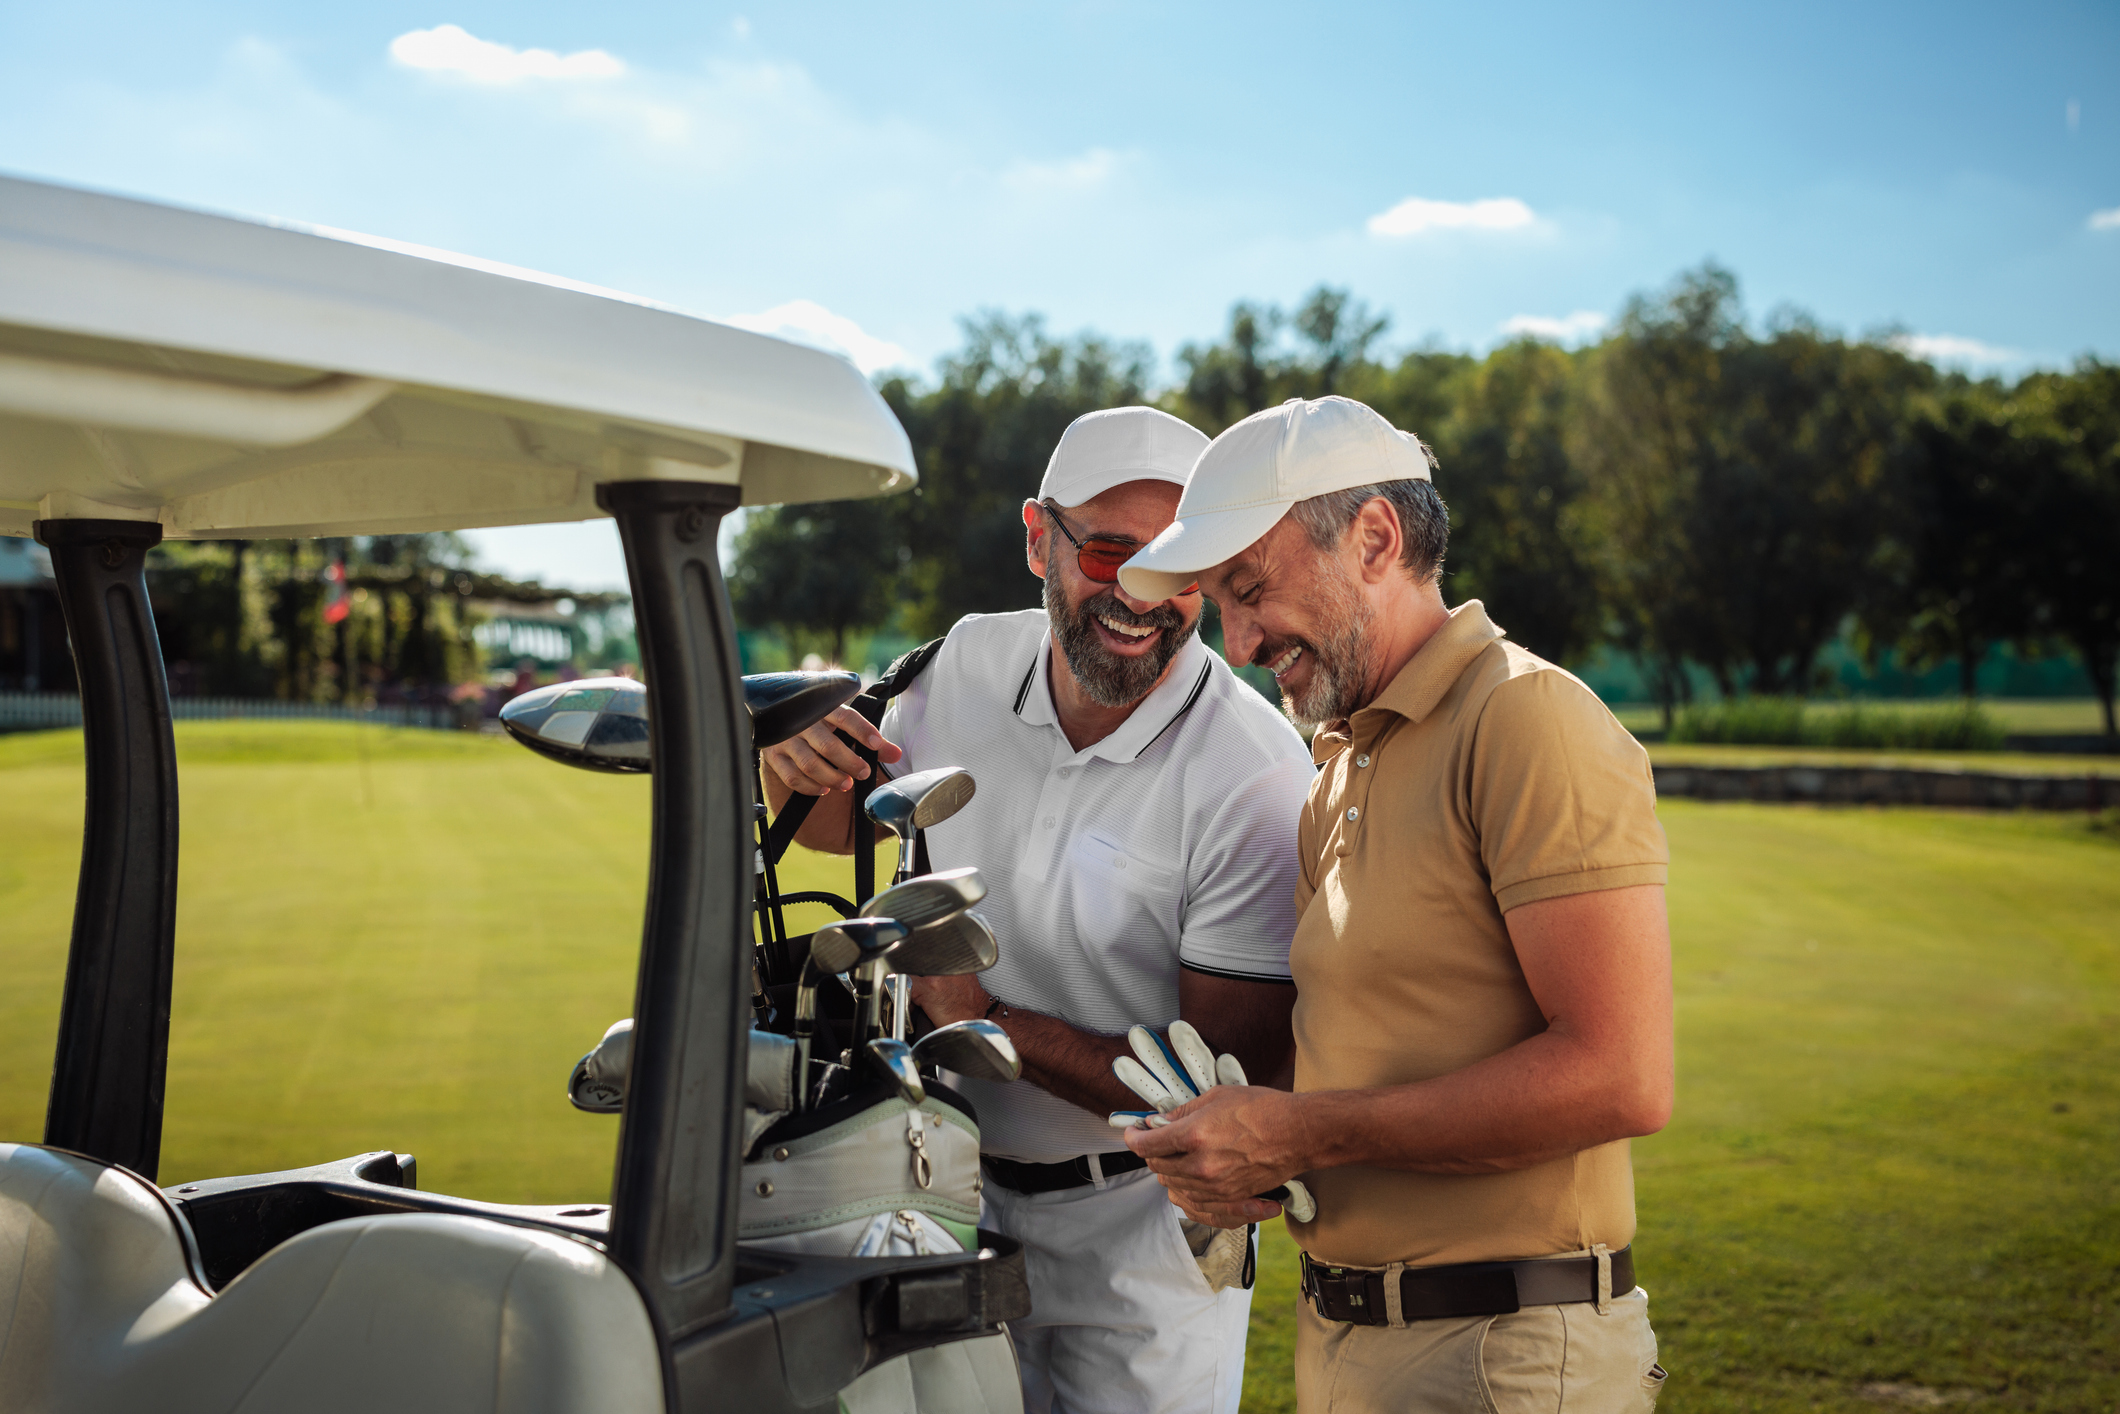 golf cart insurance and hired and non-owned auto coverage